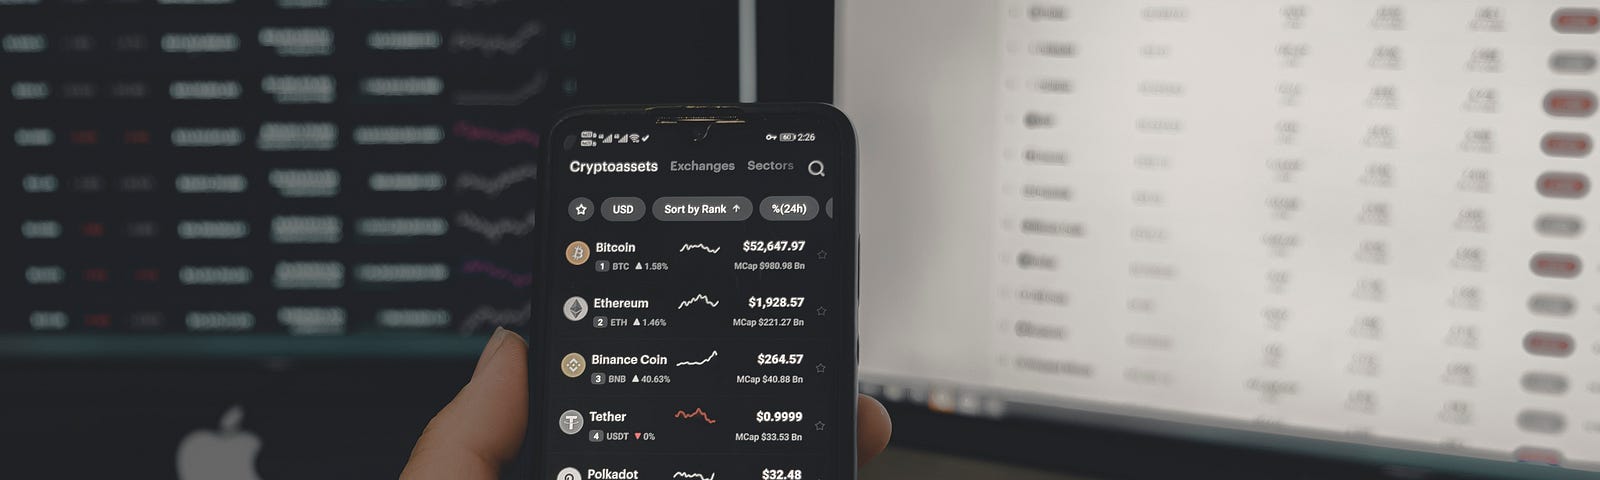 Devices with Crypto chart opened up